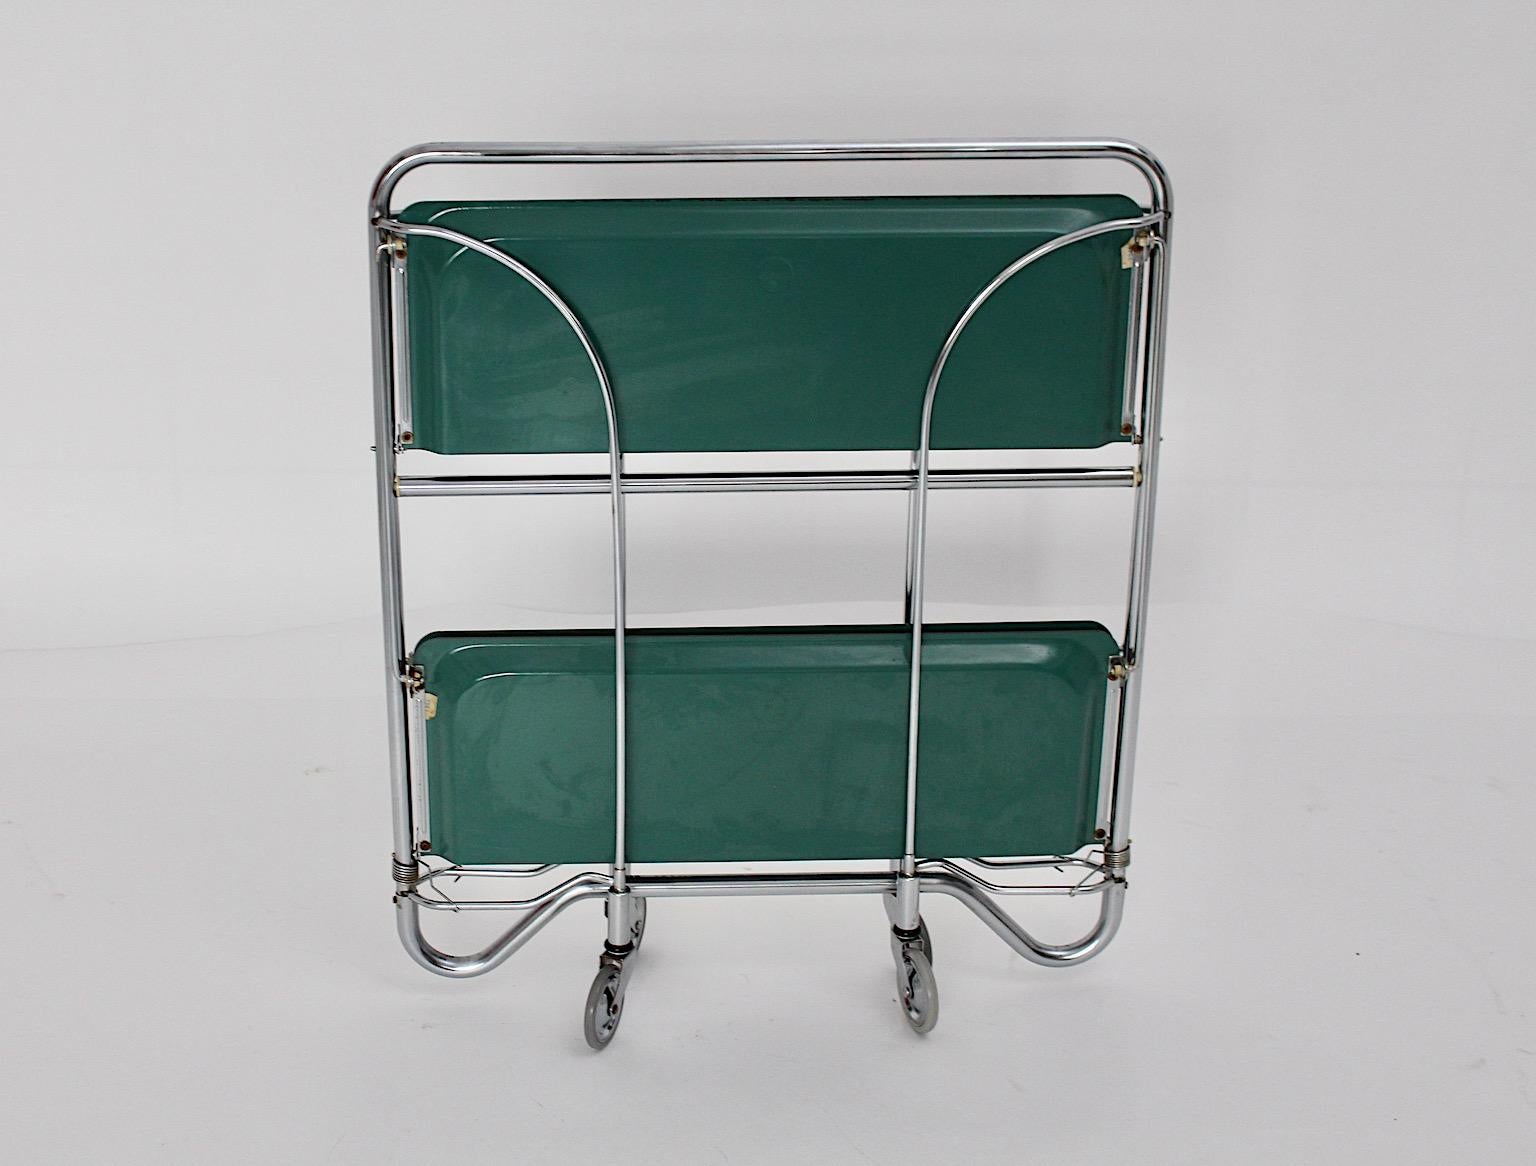 Space Age Vintage Bar Cart Serving Trolley Green Chromed Metal 1970s Germany For Sale 2